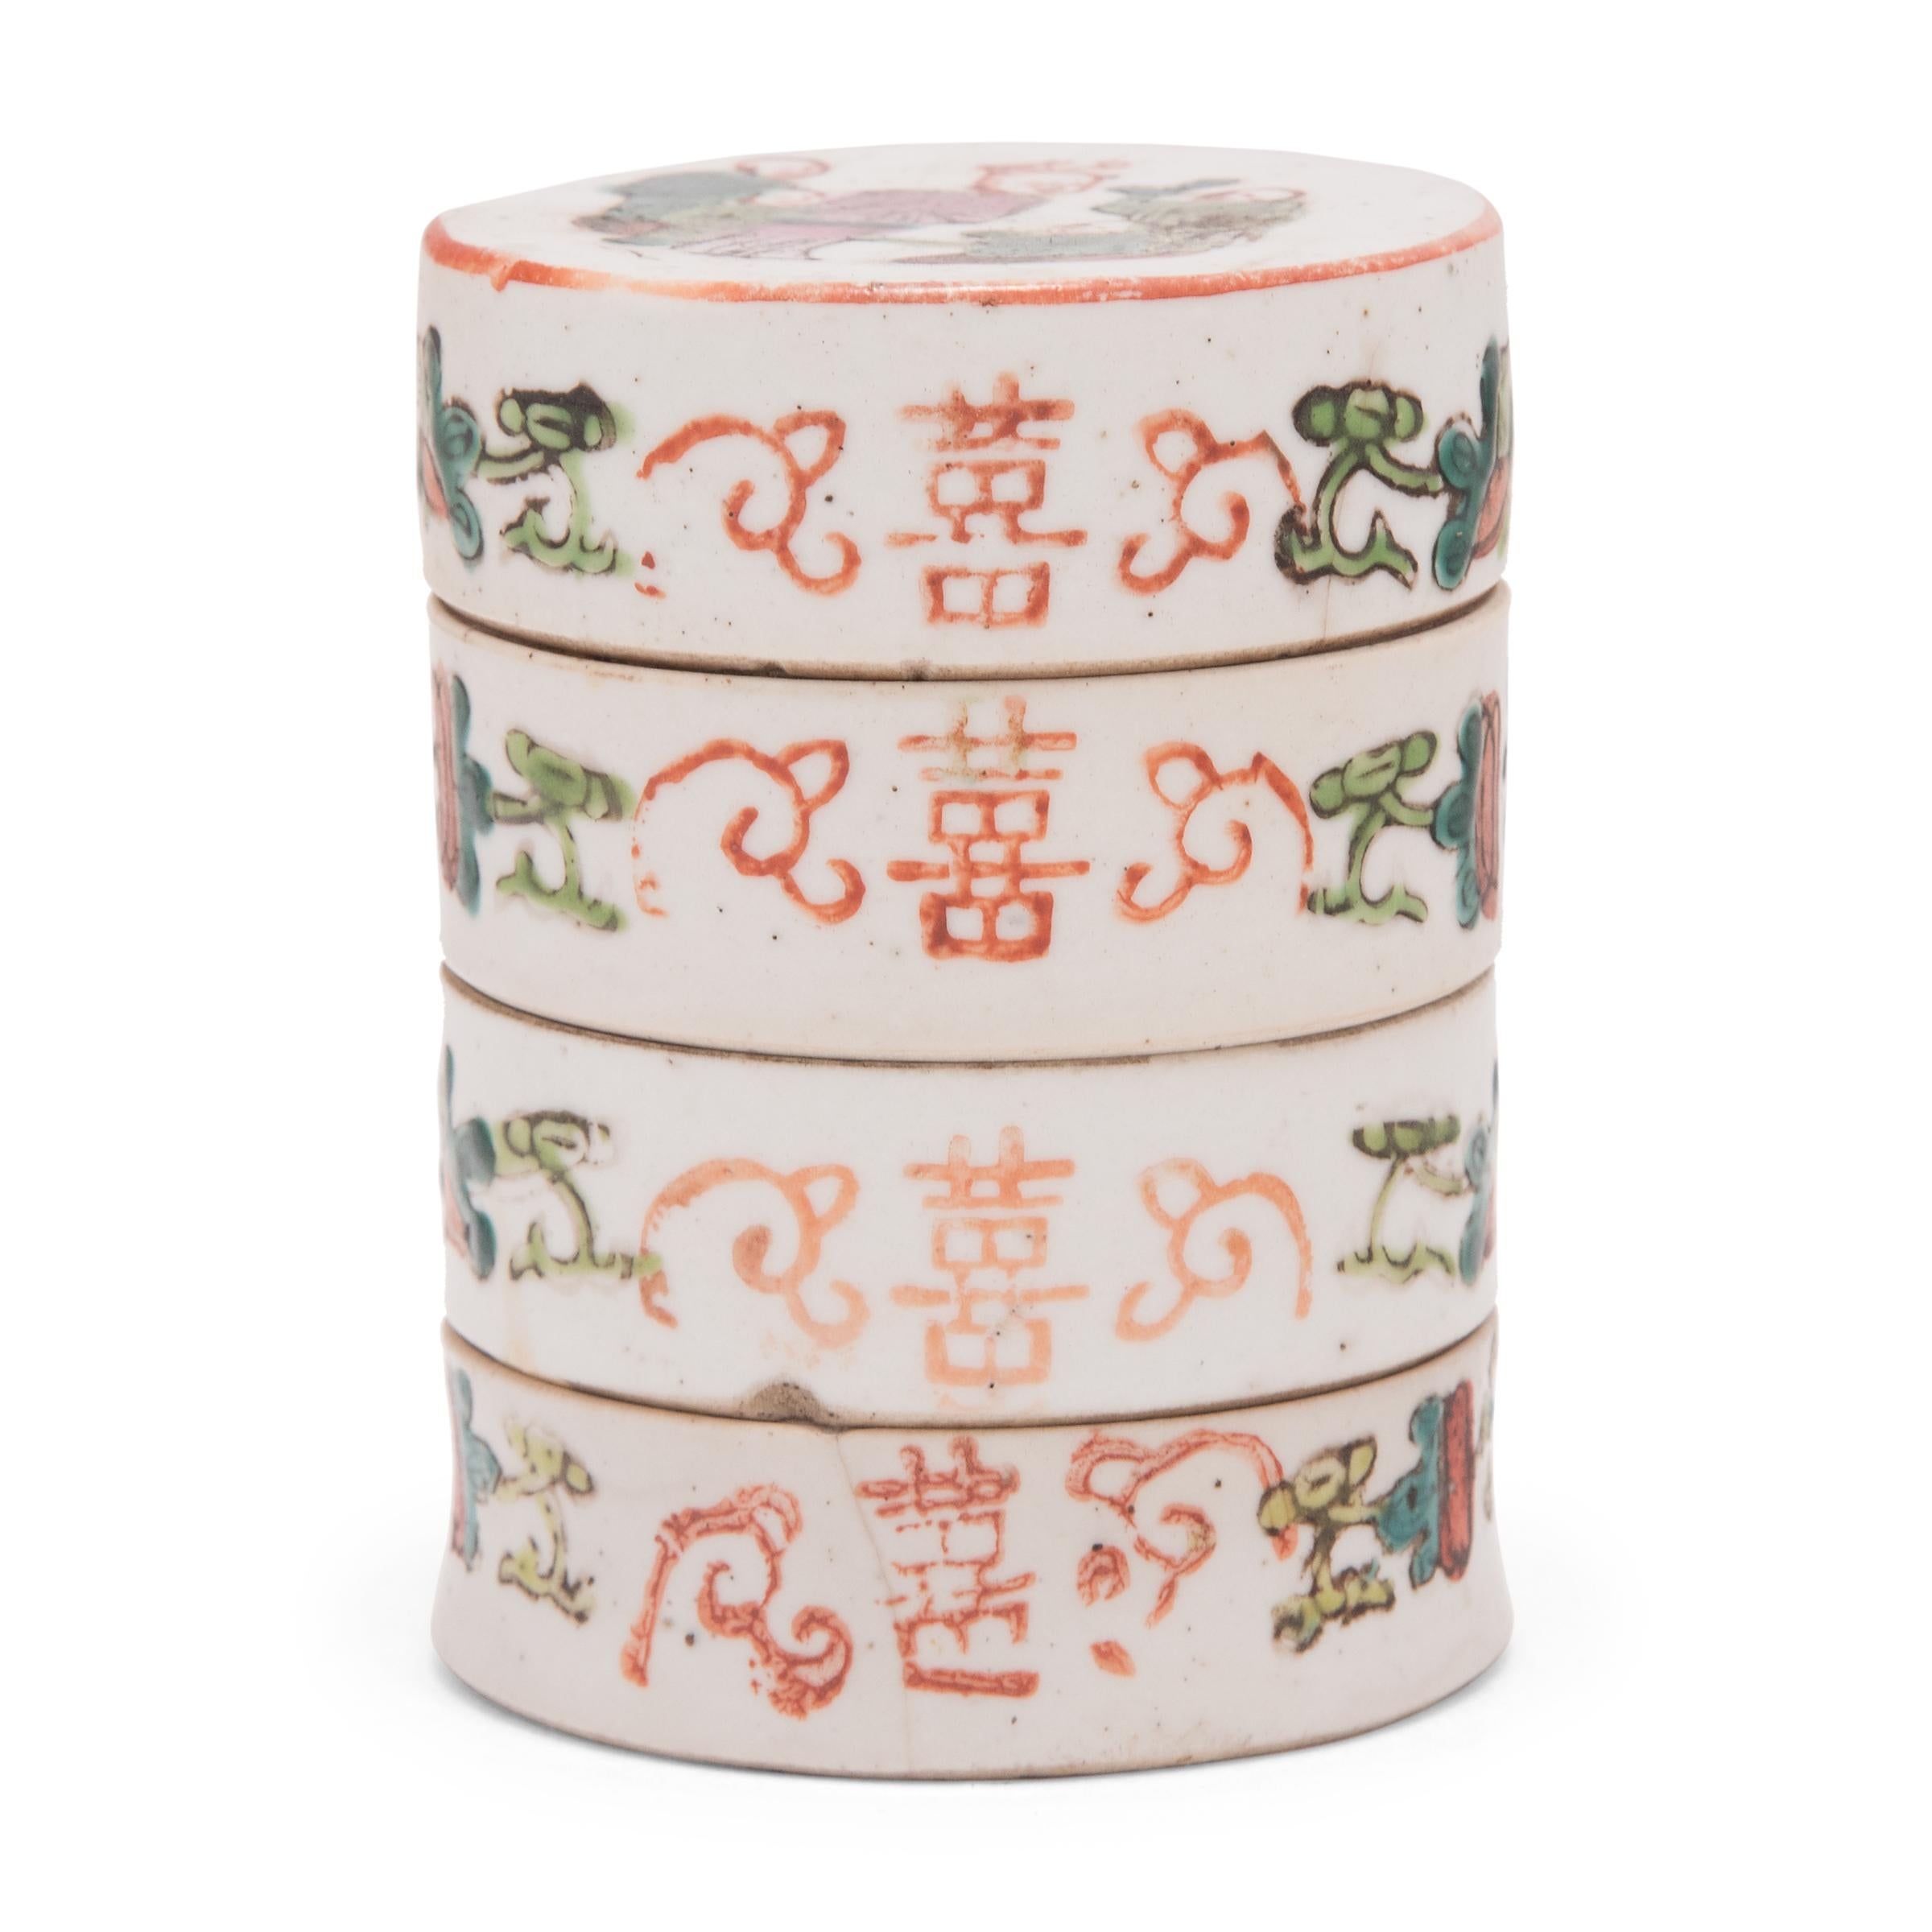 This early 20th-century porcelain container is a Chinese play on traditional Japanese stacking boxes called jubako. Each layer contained foods to celebrate Japanese New Years, each with special meanings and wishes such as good health, happiness,